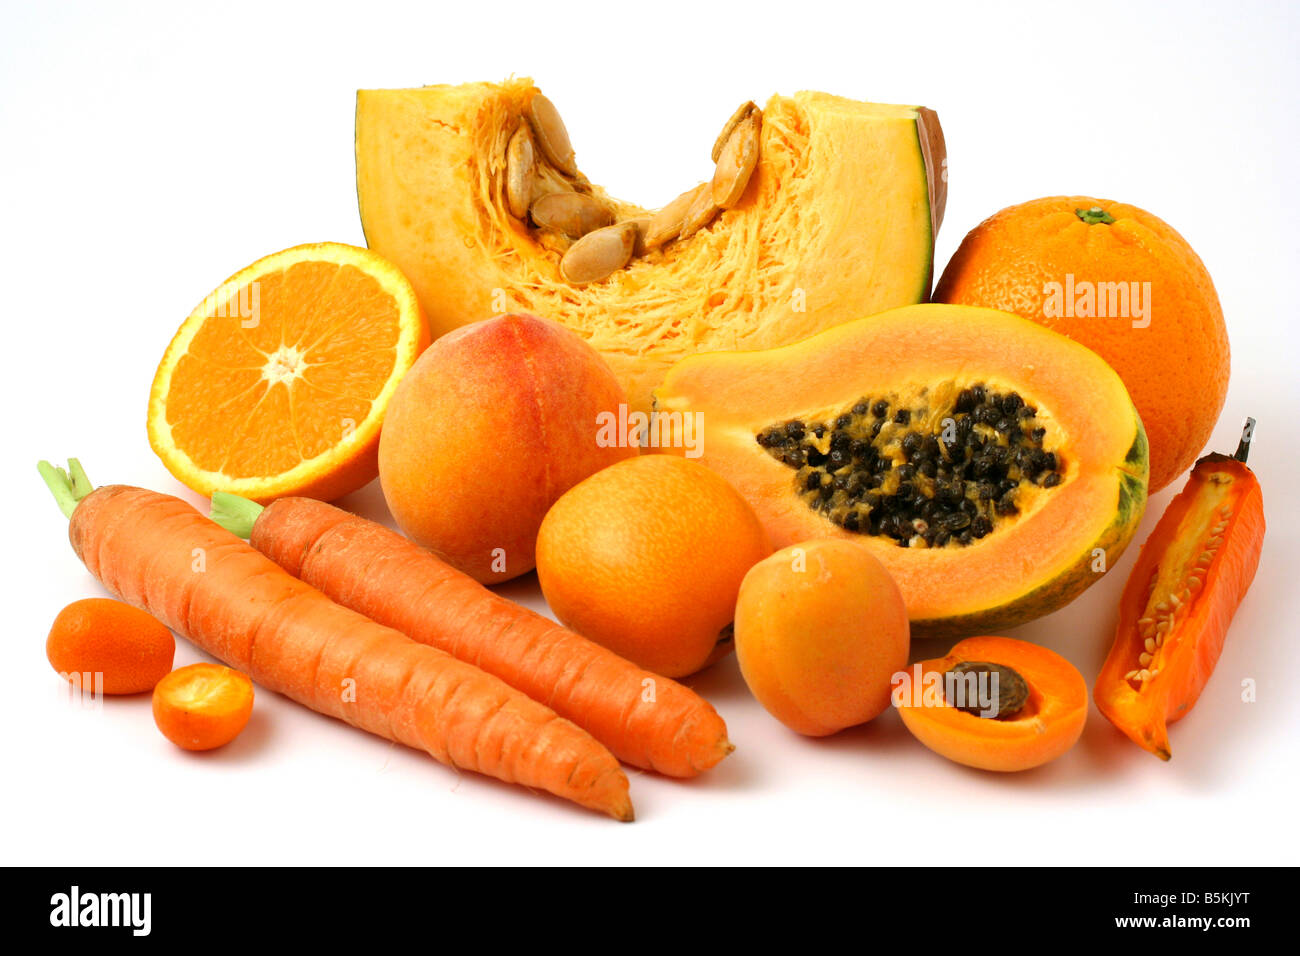 Display Of Fruit And Veg High Resolution Stock Photography and Images ...